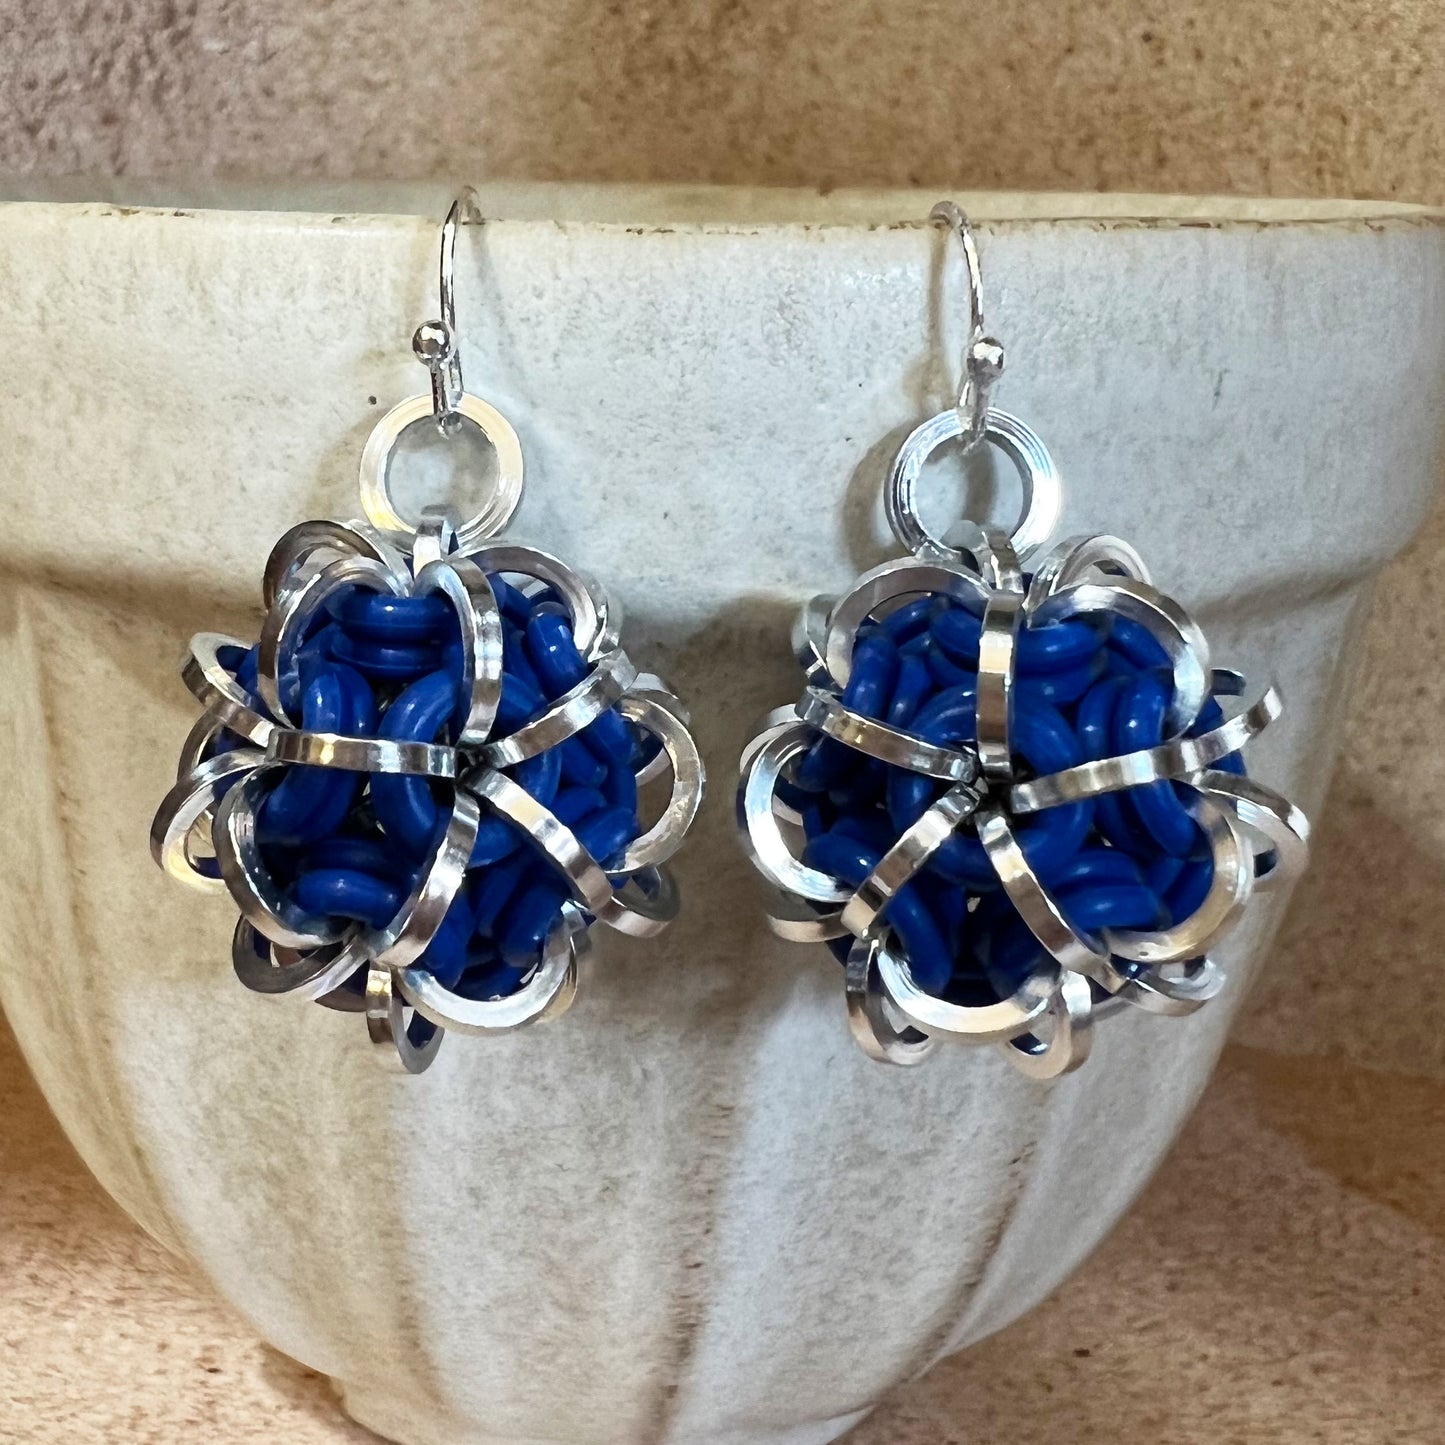 Dodecahedron Earrings (Japanese 5 in 2 Ball)  Kit with Free Video - Celestial Blue & Silver